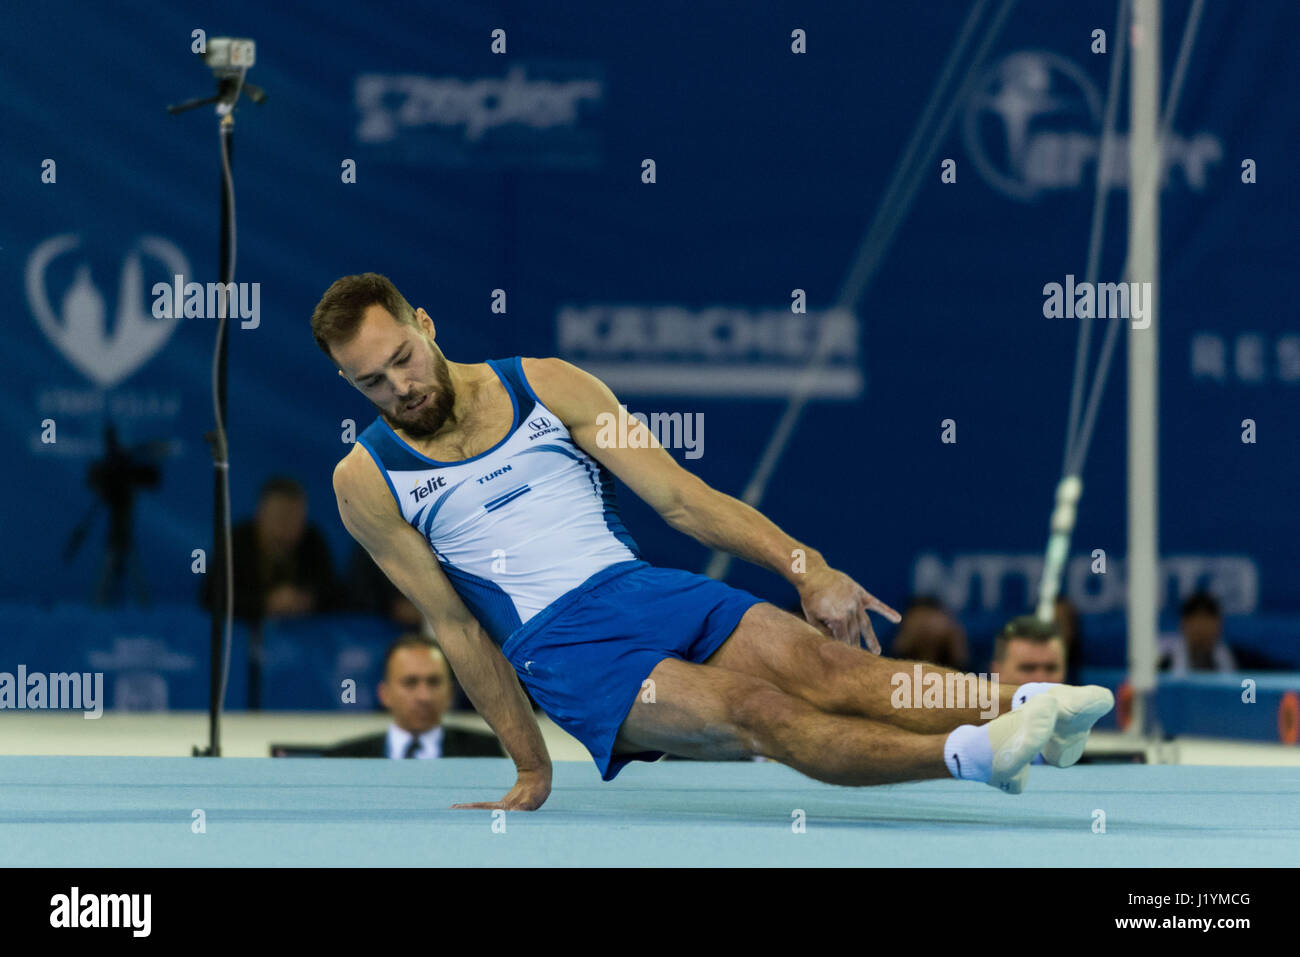 Alexander Shatilov (ISR) performs on the floor during the Men's Apparatus Finals at the European Men's and Women's Artistic Gymnastics Championships in Cluj Napoca, Romania. 22.04.2017 Photo: Catalin Soare/dpa Stock Photo